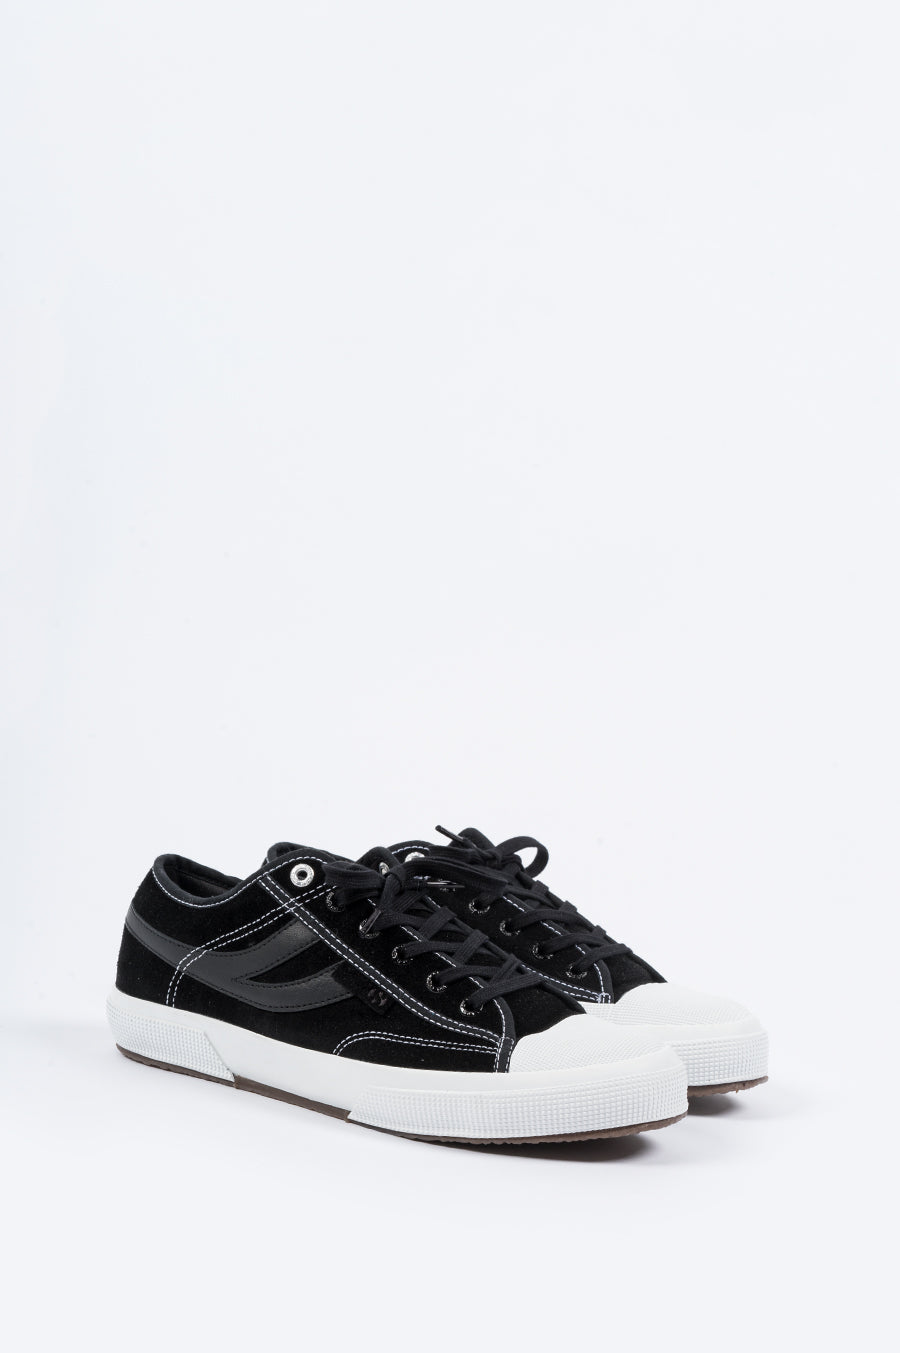 FUTUR X HIGHS AND LOWS X SUPERGA FHS PRO LOW BLACK - BLENDS